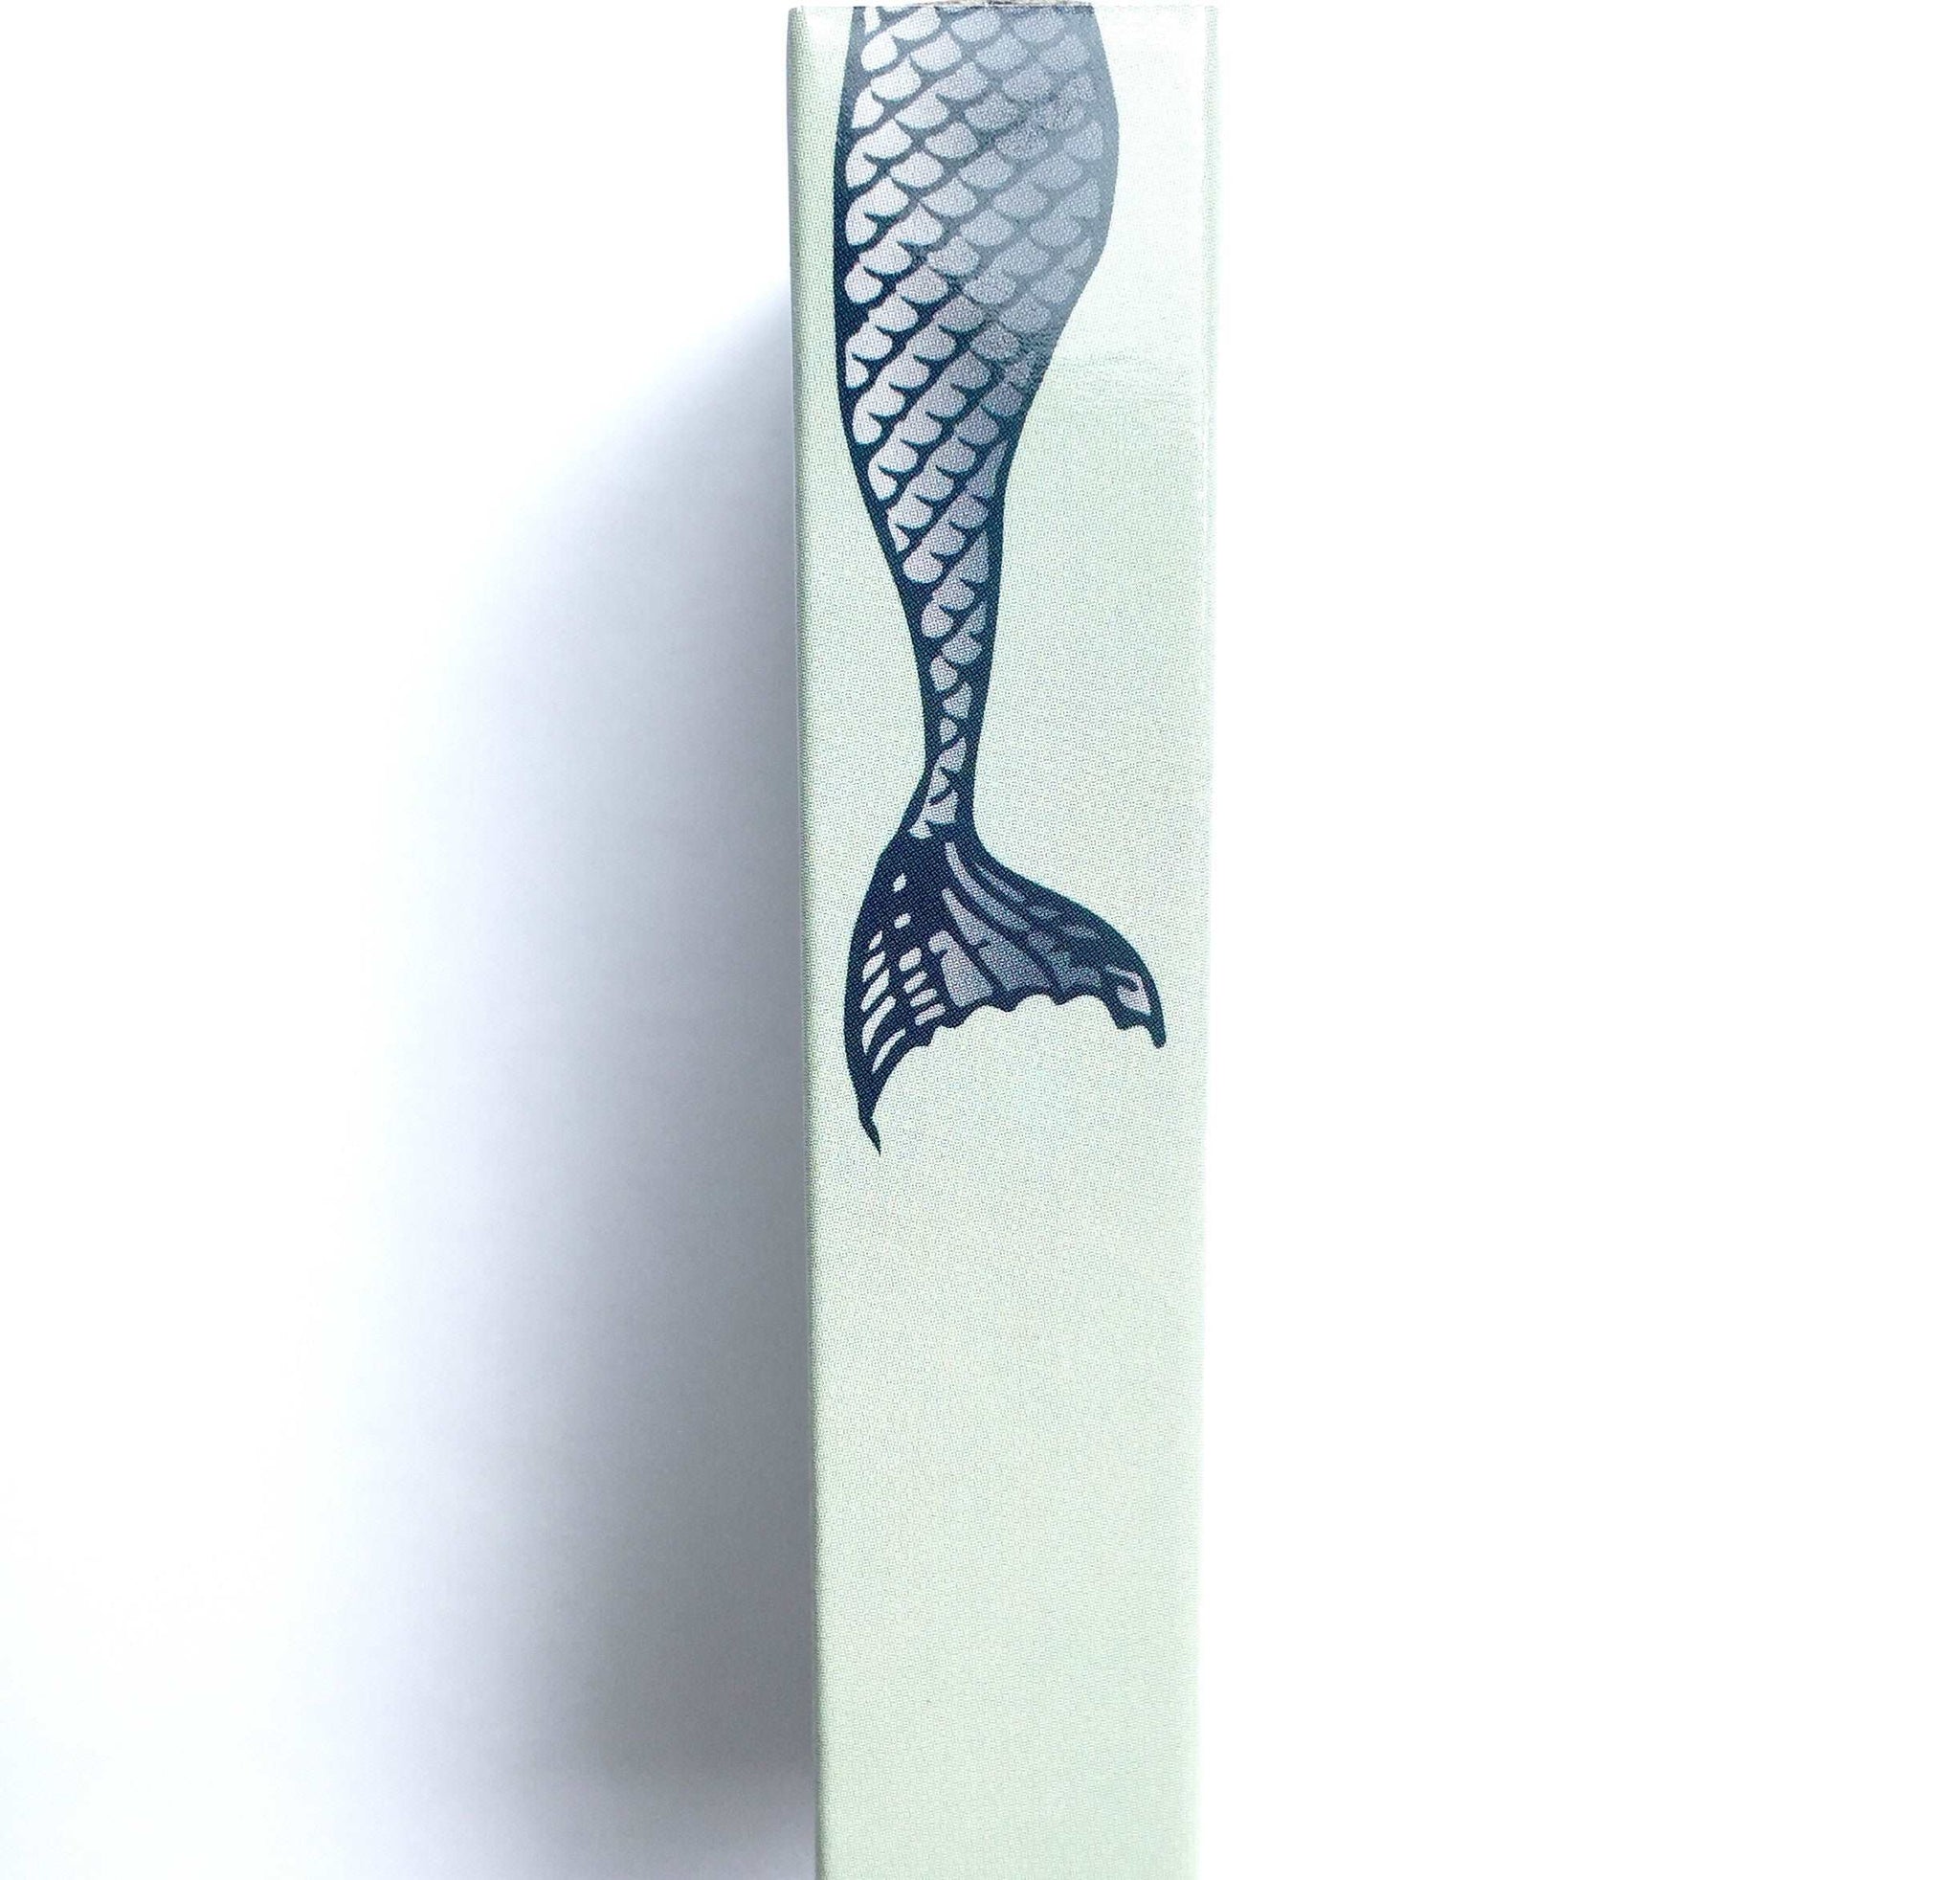 These Mermaid Brand jumbo matches are perfect for lighting our hand poured soy candles!  These decorative matches are a lovely addition to enhance any home décor.  Our designer match boxes are reusable, and each comes with 50 matches tipped in blue.